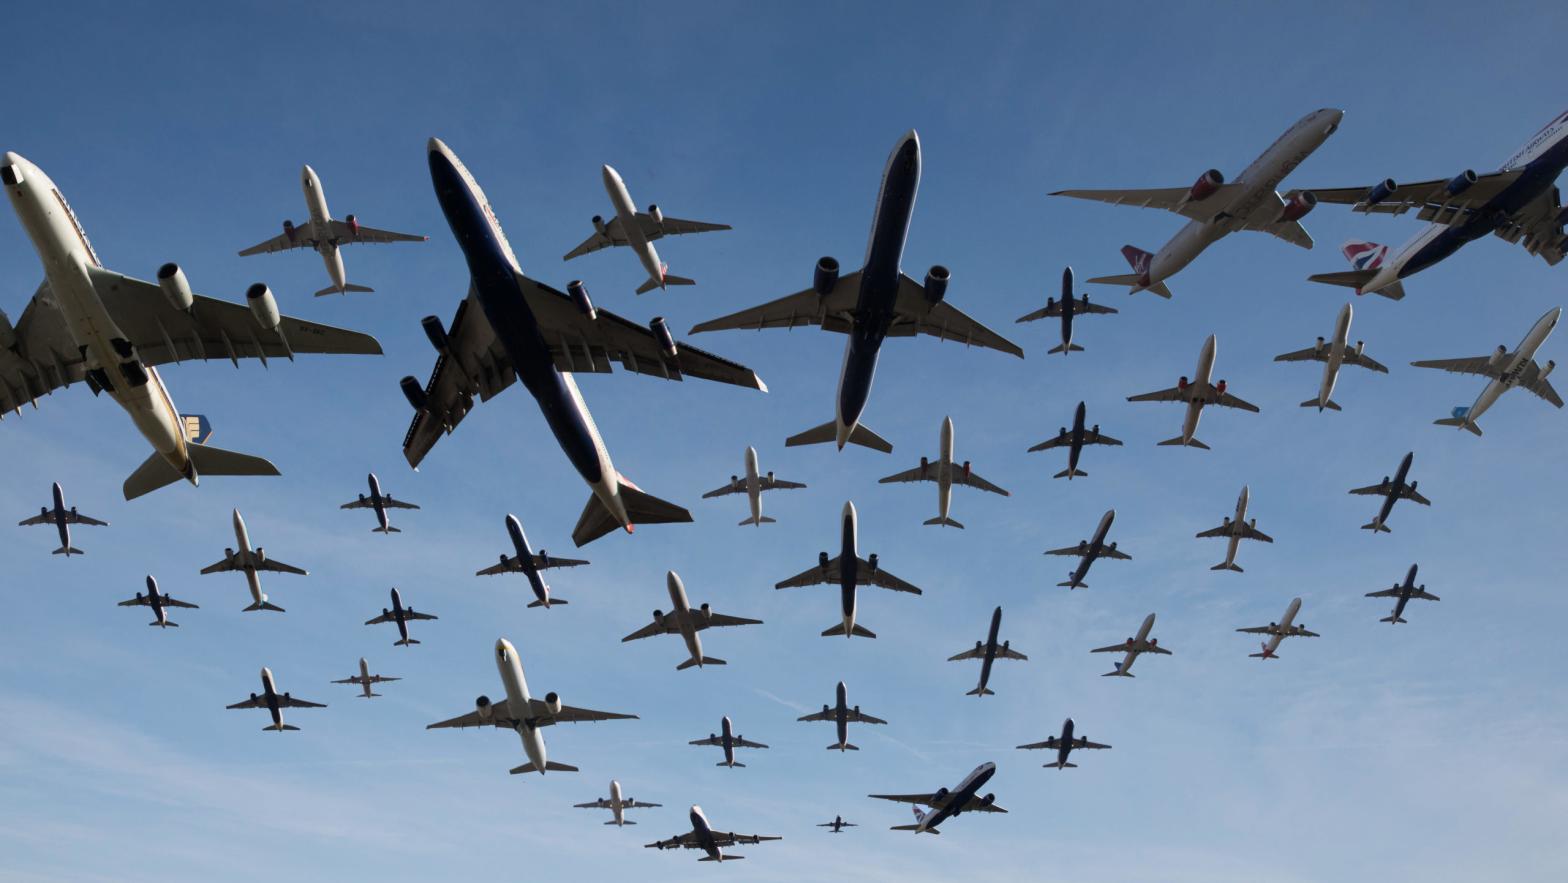 A composite photo of planes taking off from Heathrow Airport over the course of an hour. (Photo: Dan Kitwood, Getty Images)